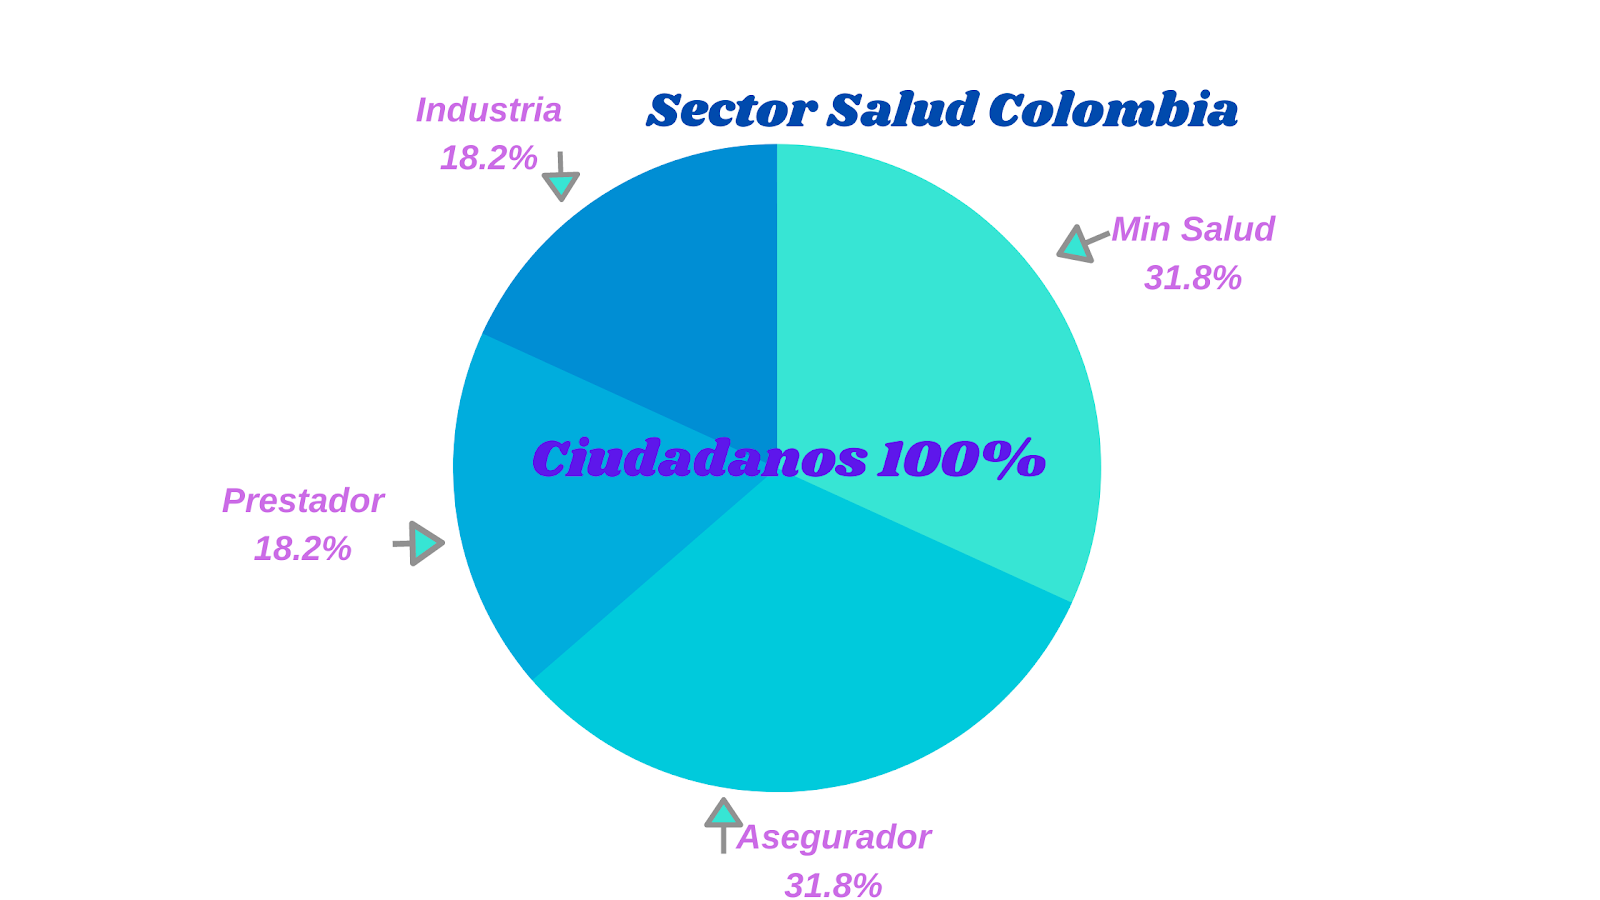 Sector Salud Colombia